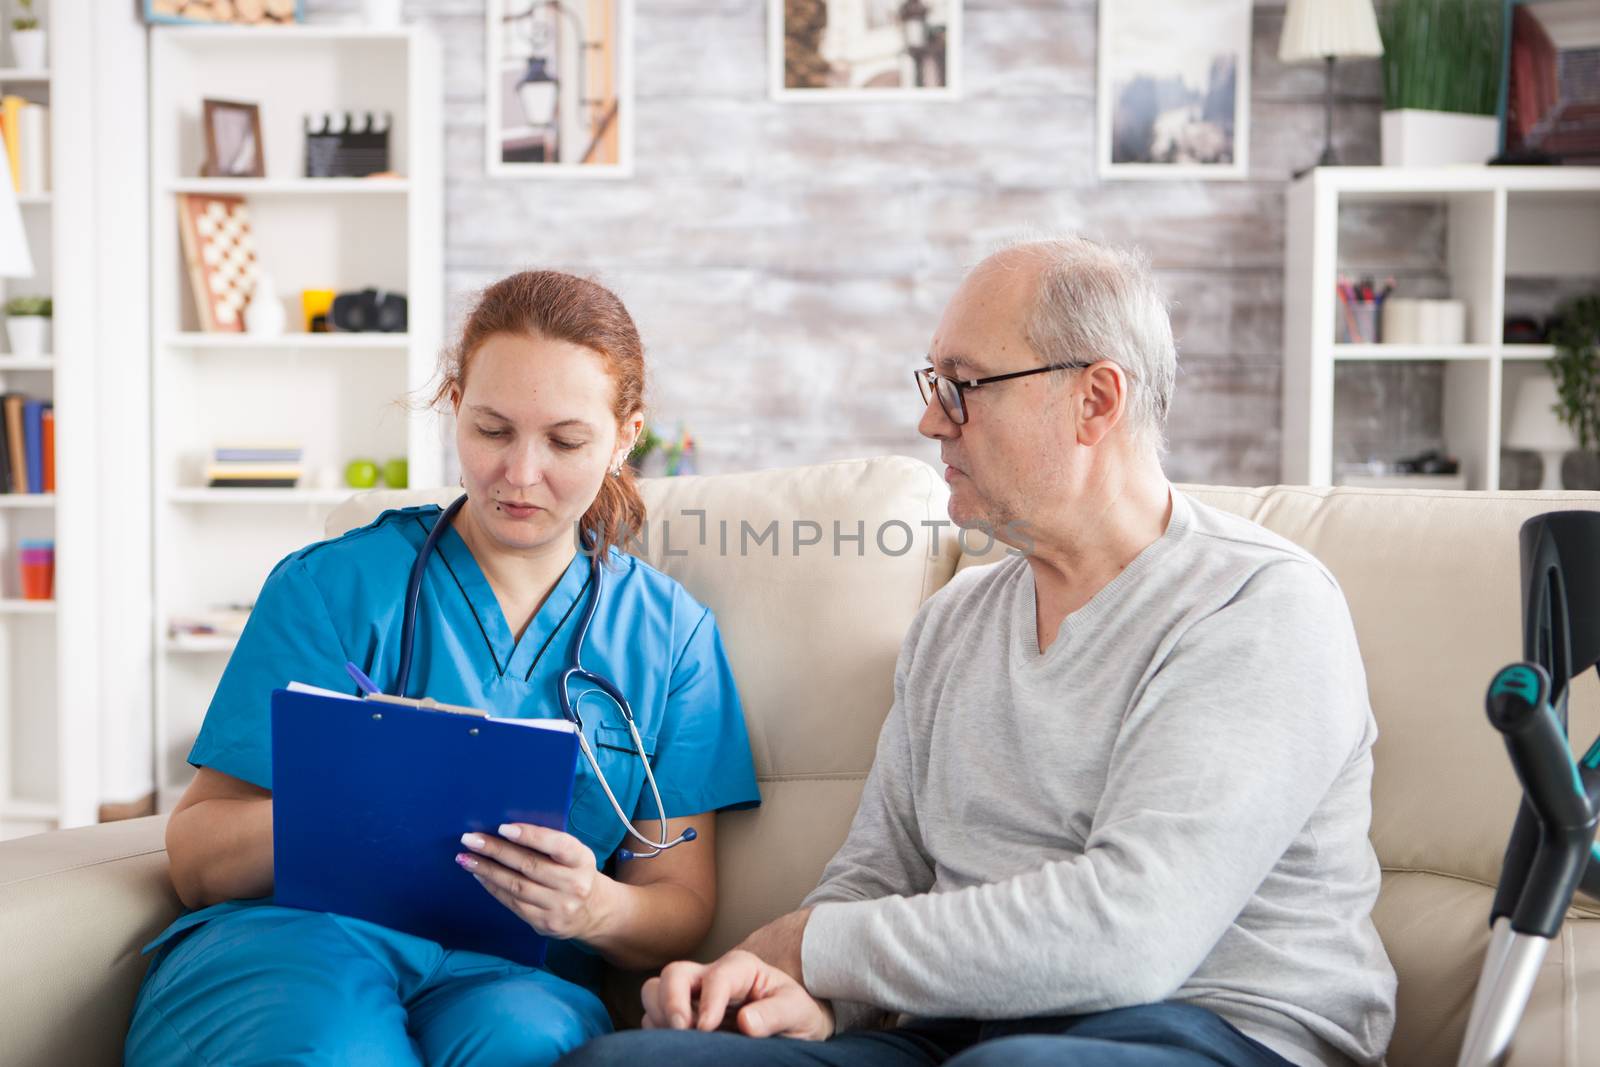 Female doctor with senior man sitting on couch in nursing home writing a prescription on clipboard.